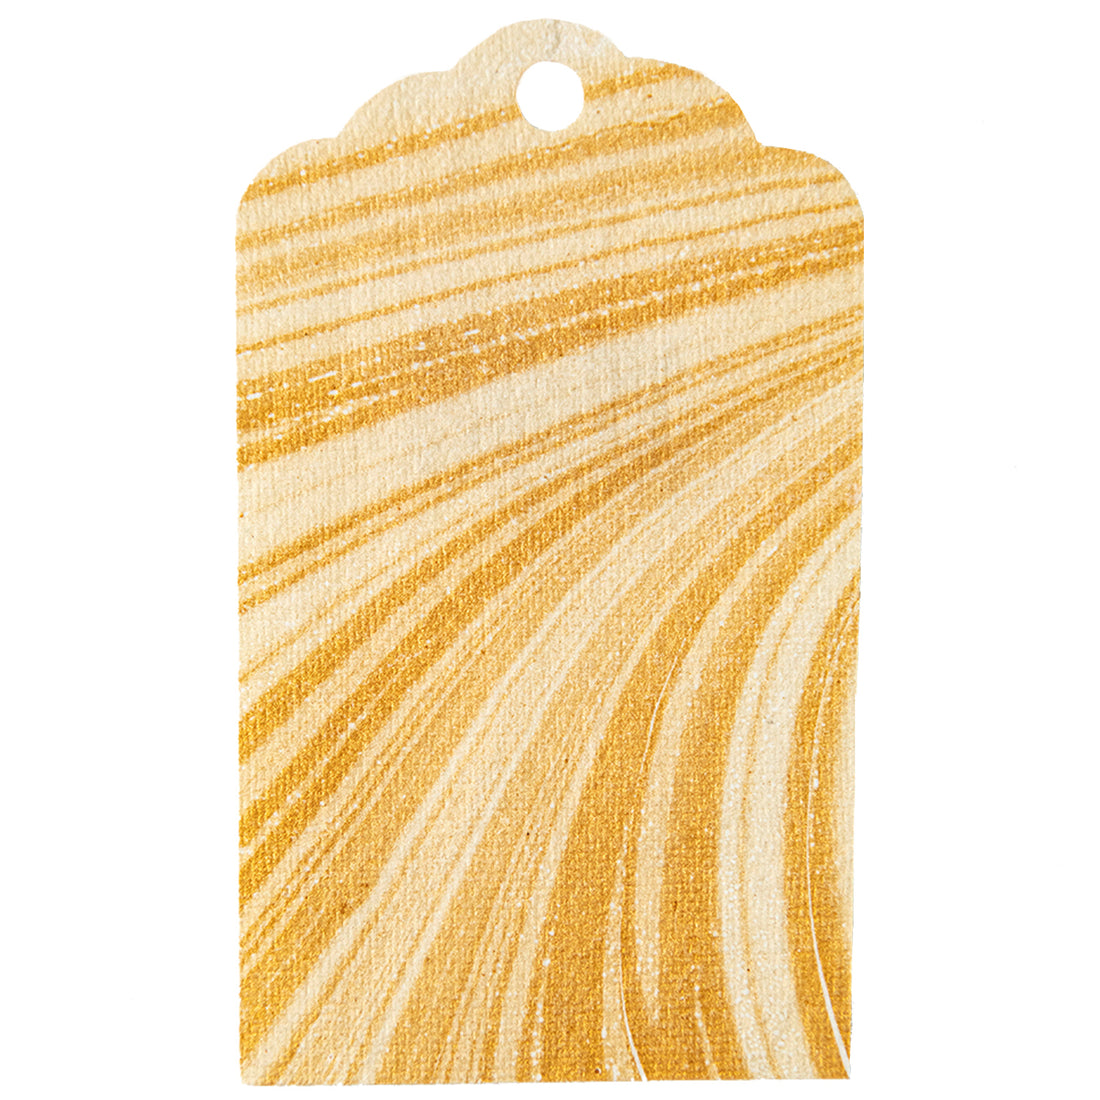 Gold Leaf Marbled Gift Tags